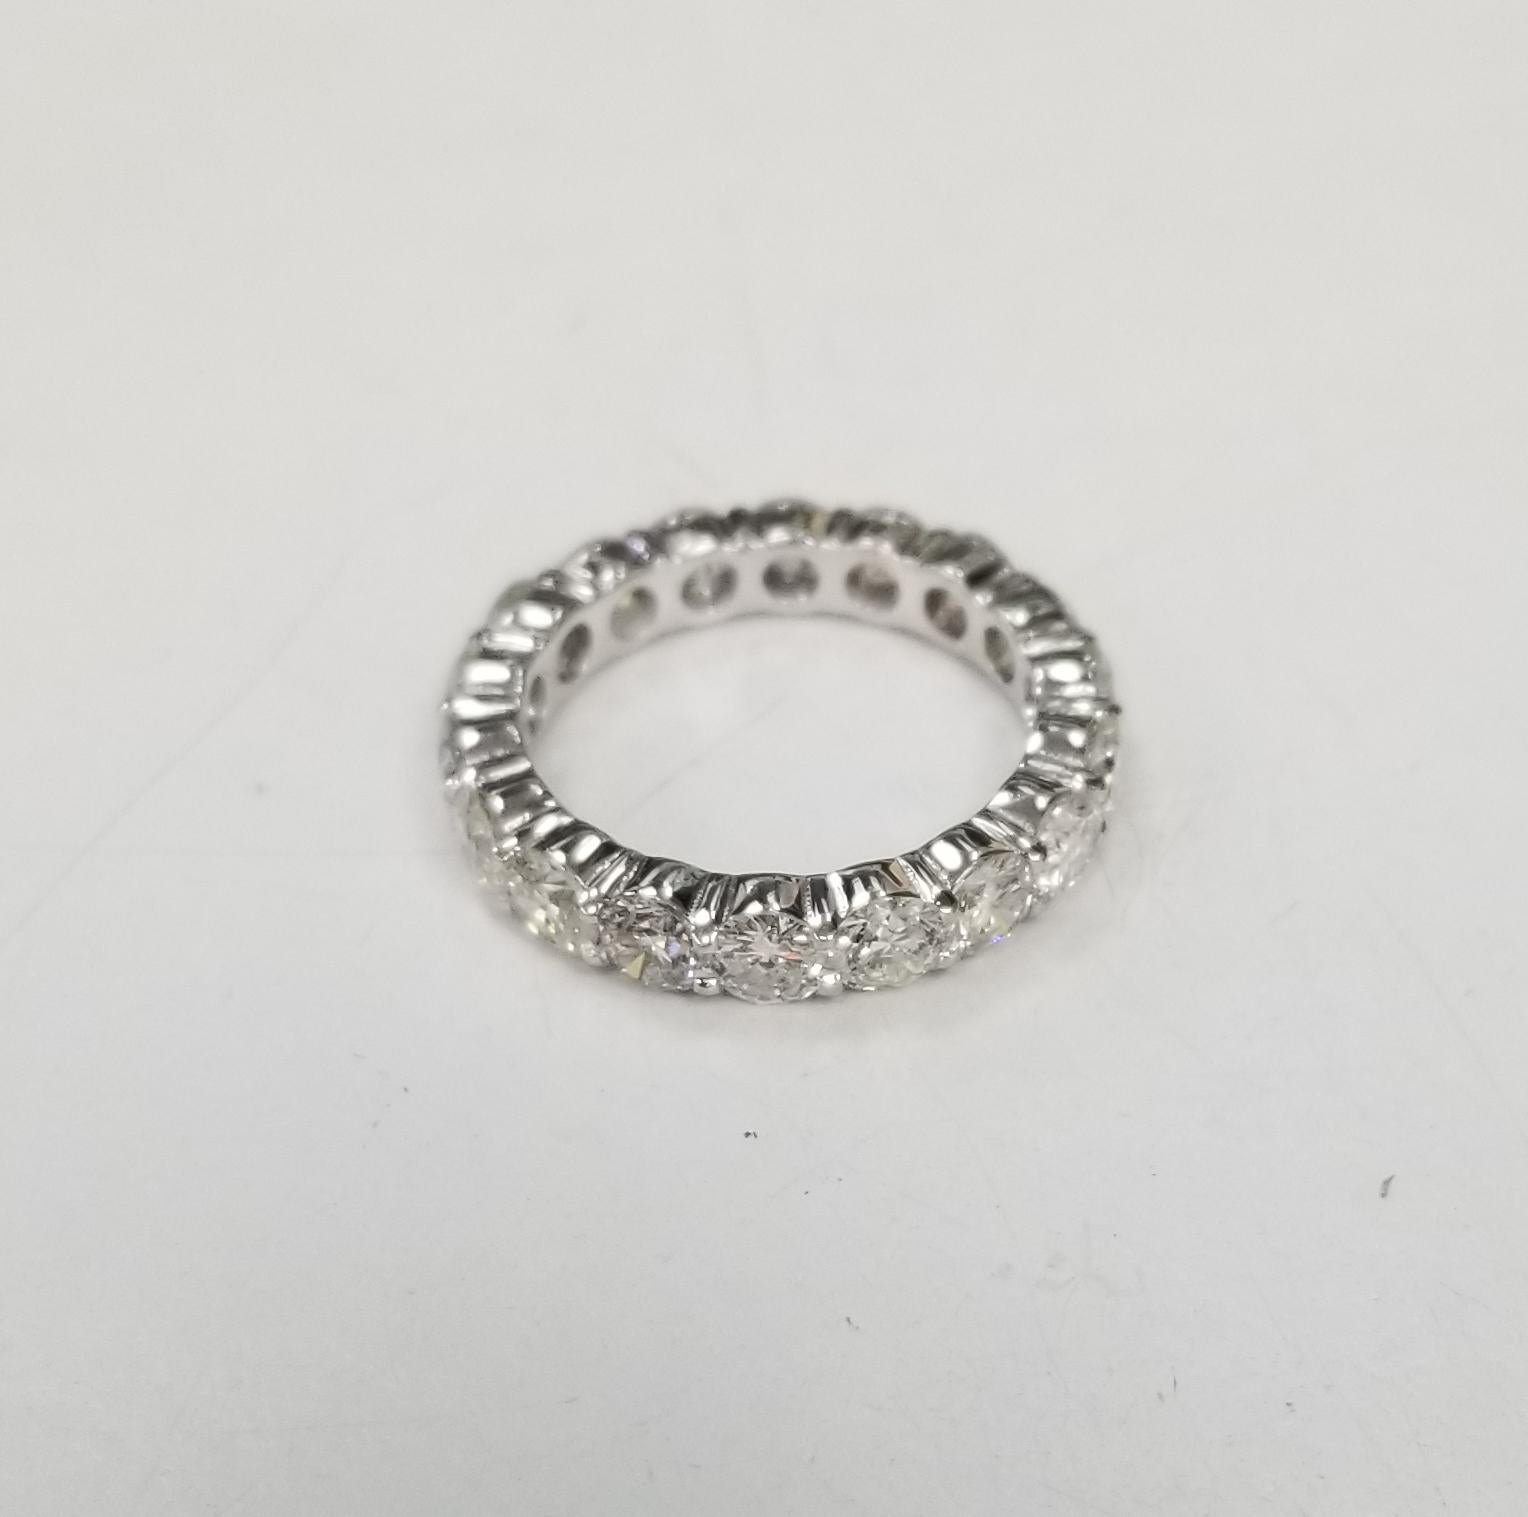 14k white gold 4.25 Carats Diamond Eternity Ring Set with Shared Prongs
*Motivated to Sell – Please make a Fair Offer*
Specifications:
    main stone: BRILLIANT CUT DIAMOND
    diamonds: 18 PIECES
    carat total weight: 4.25
    color:  G
   